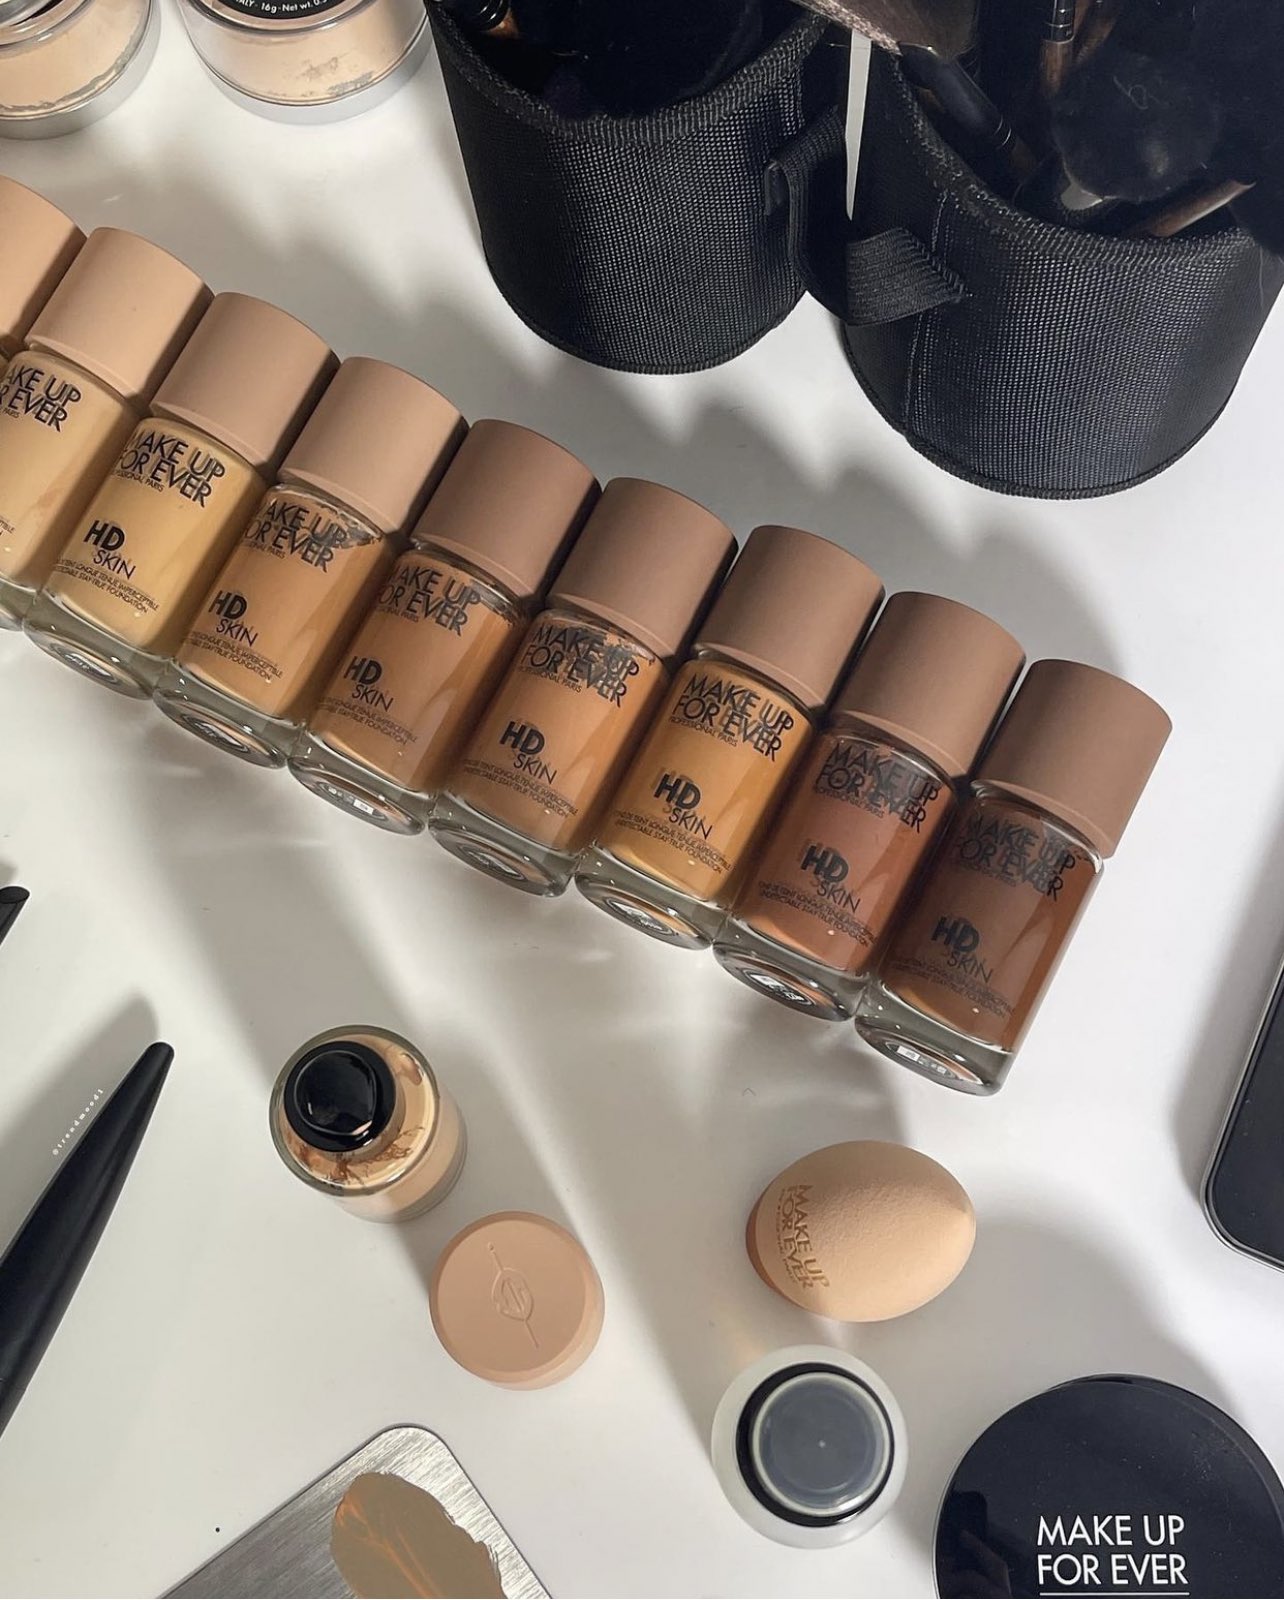 HD Skin Undetectable Longwear Foundation - MAKE UP FOR EVER